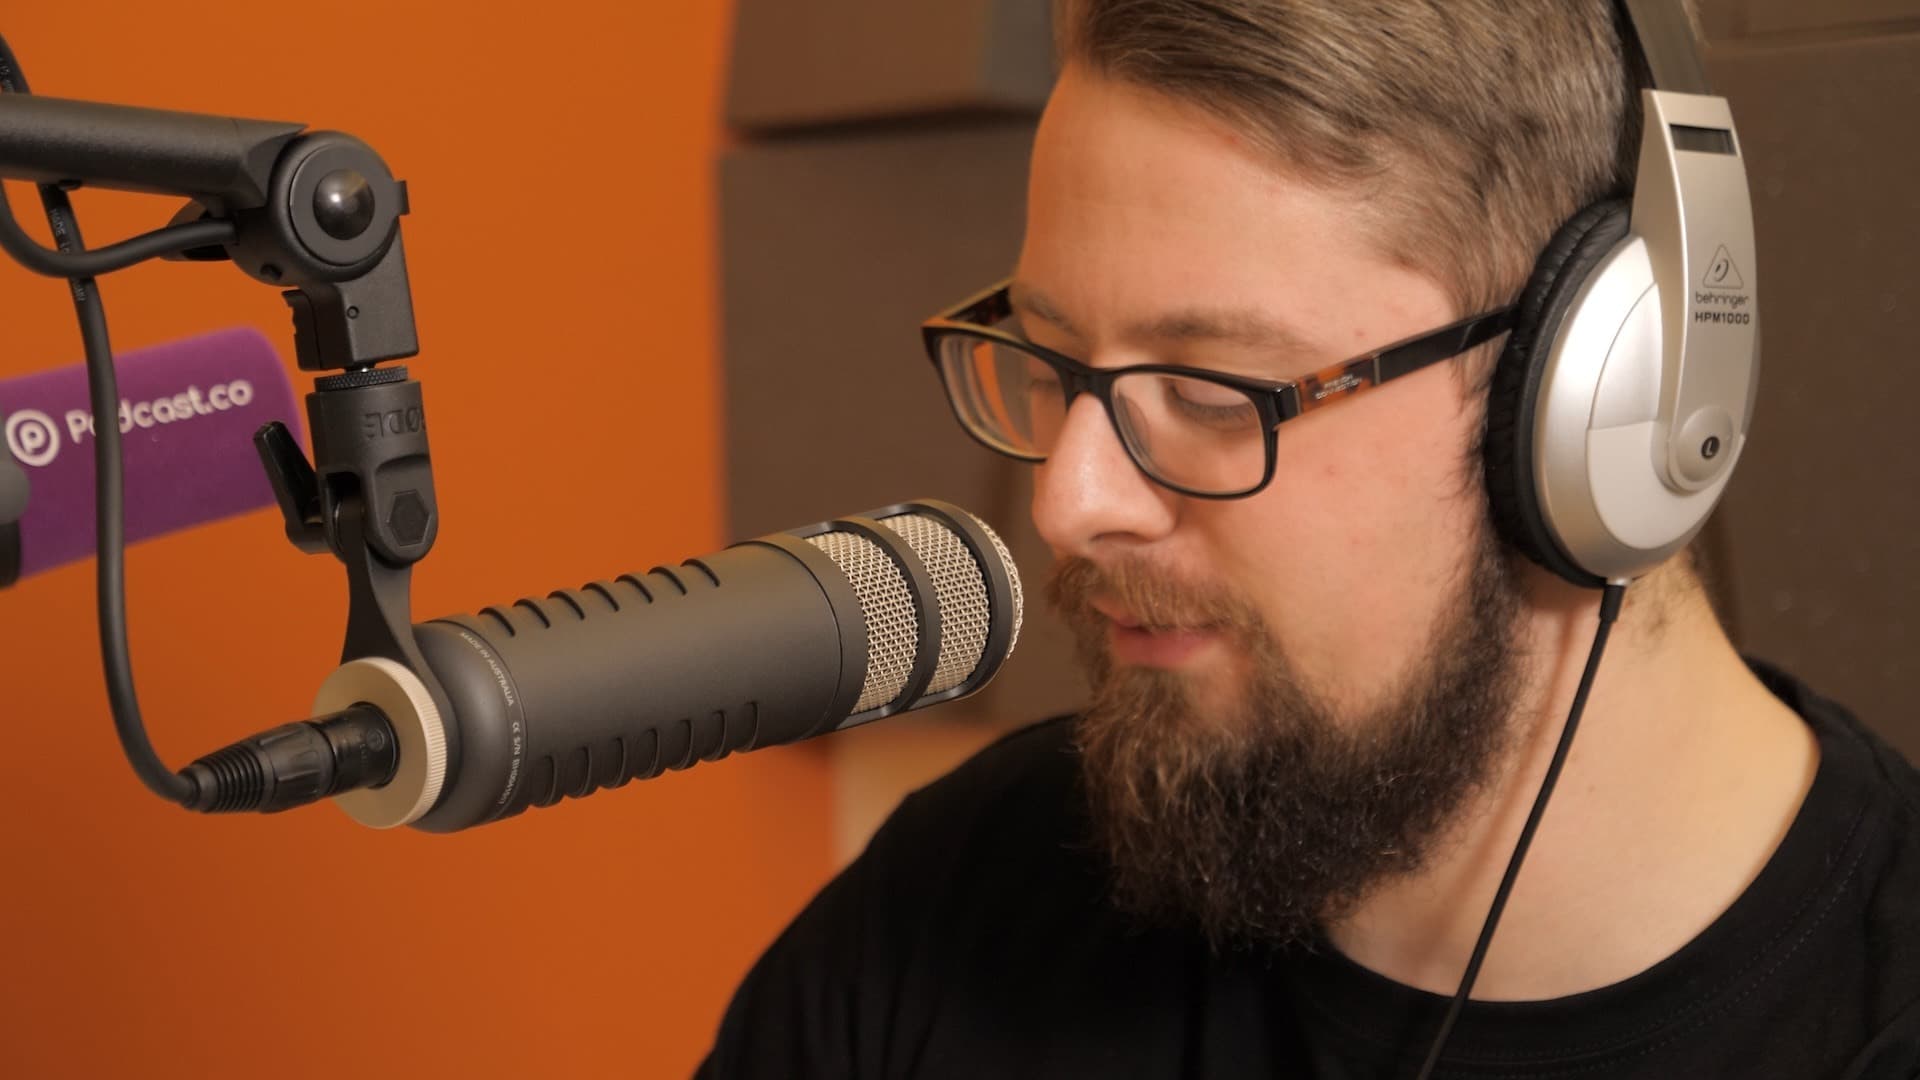 A man wearing headphones and speaking in to a studio microphone.